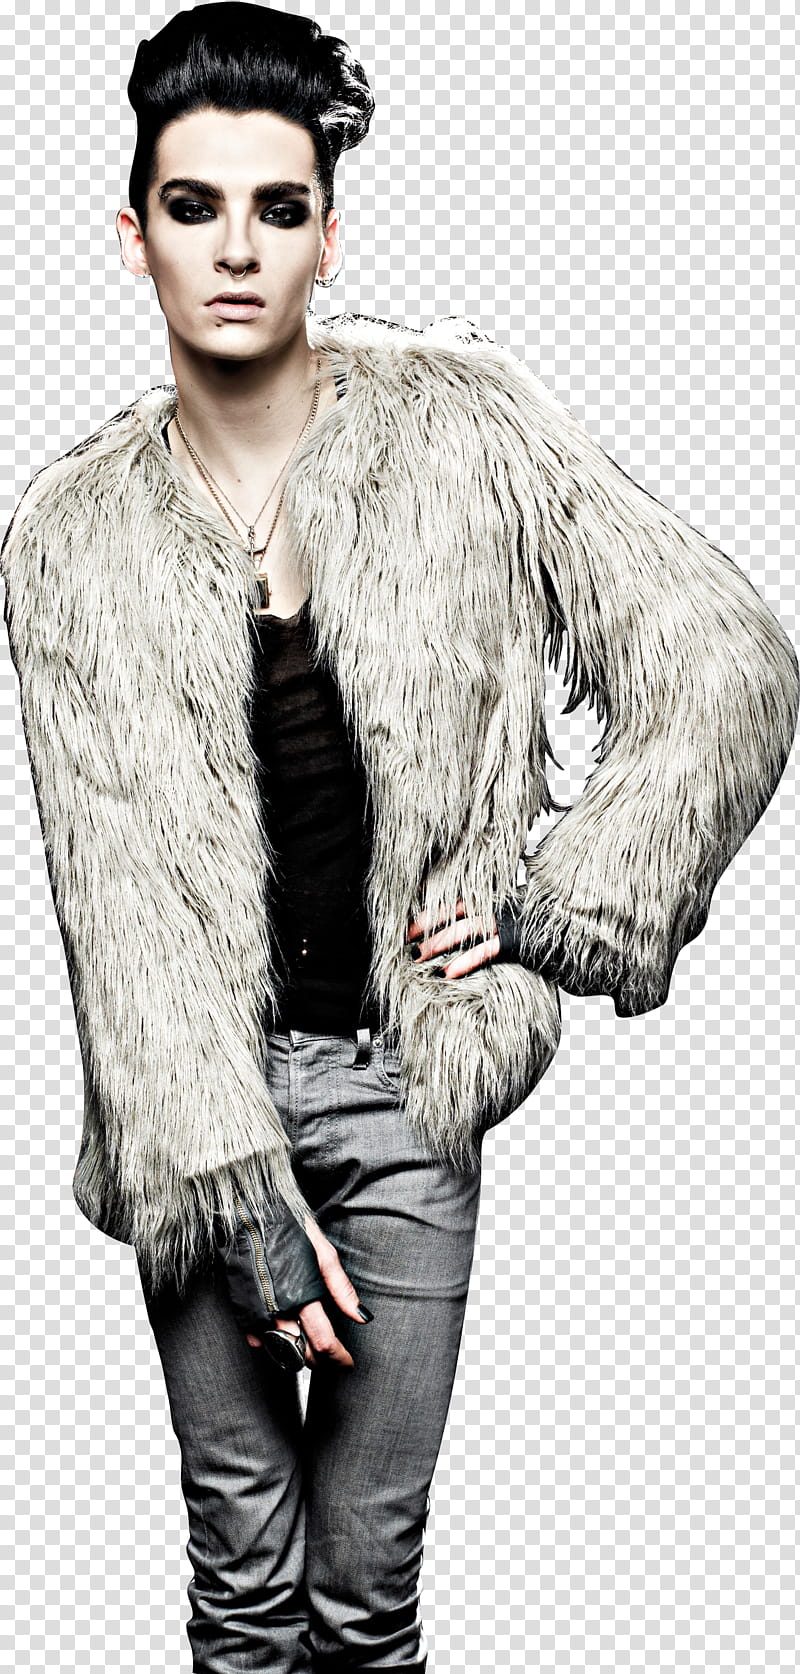 TH , man wearing fur coat transparent background PNG clipart